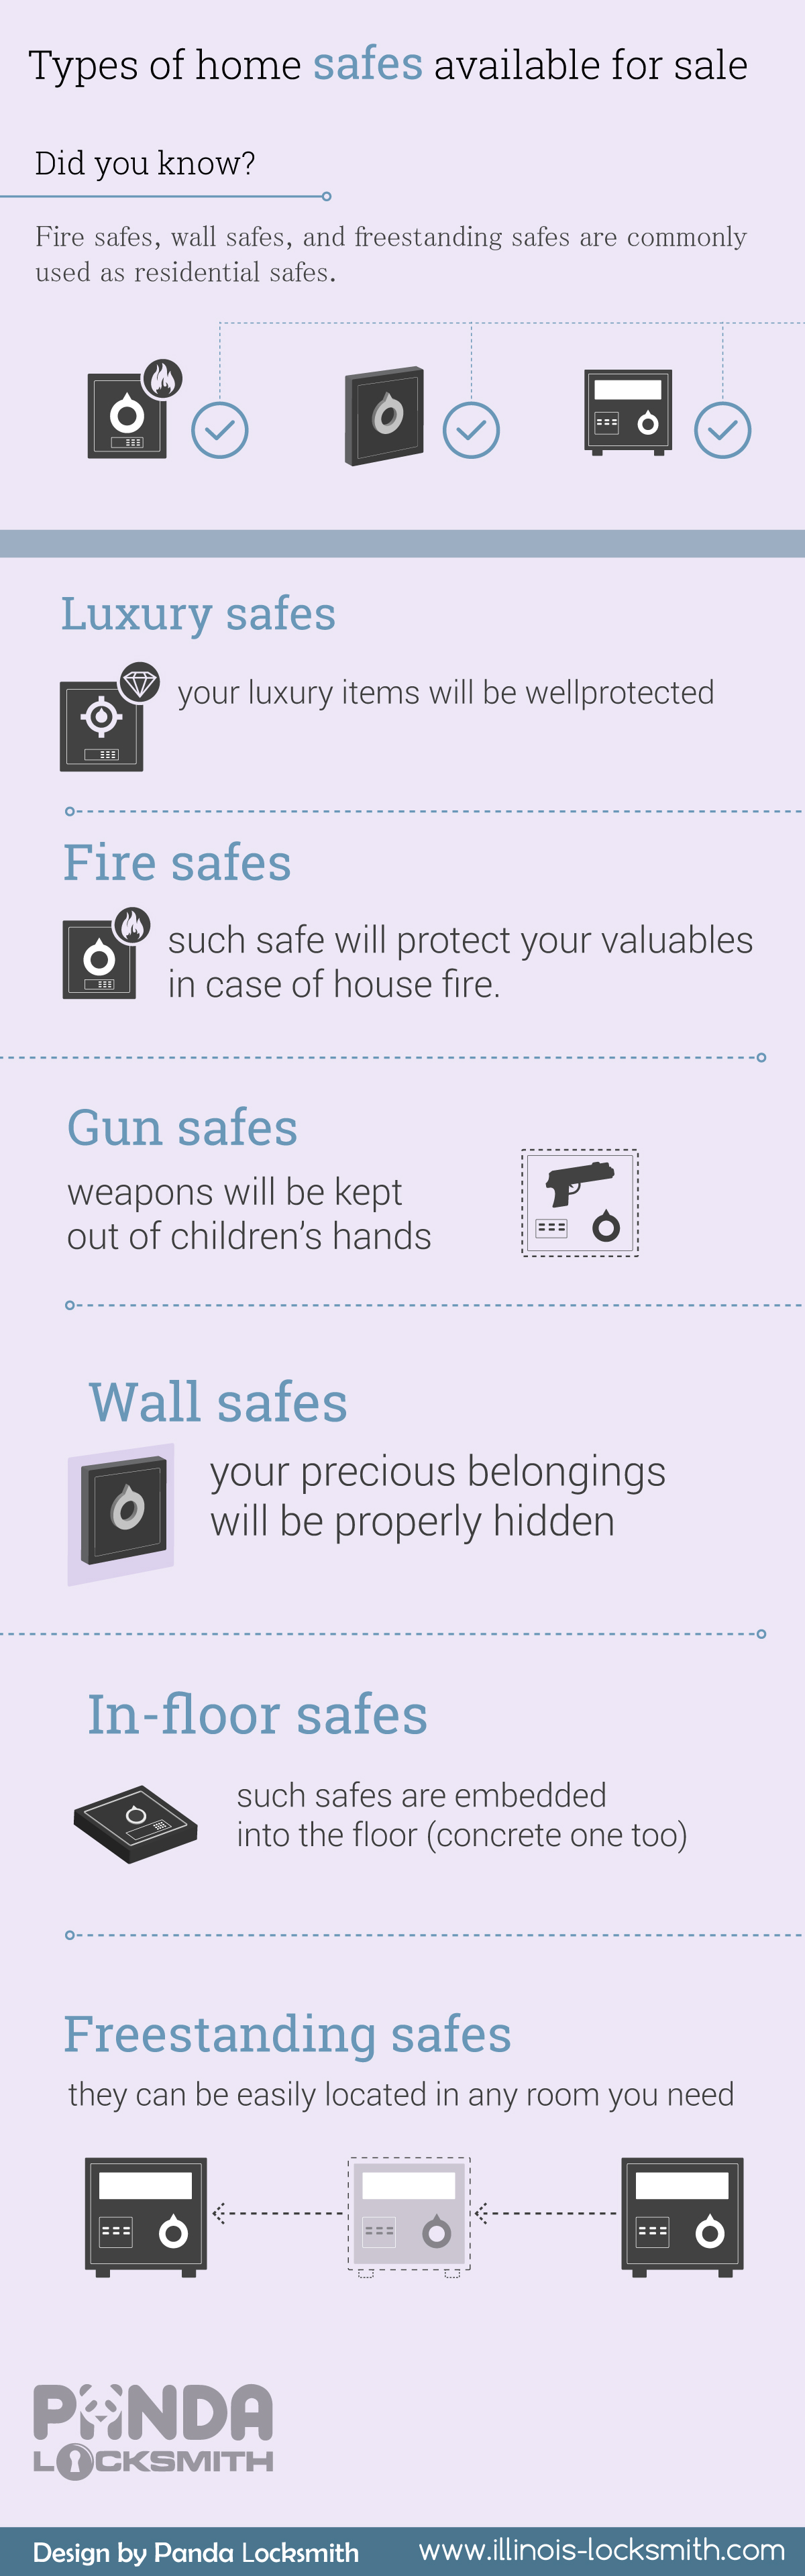 Types of home safes infographic